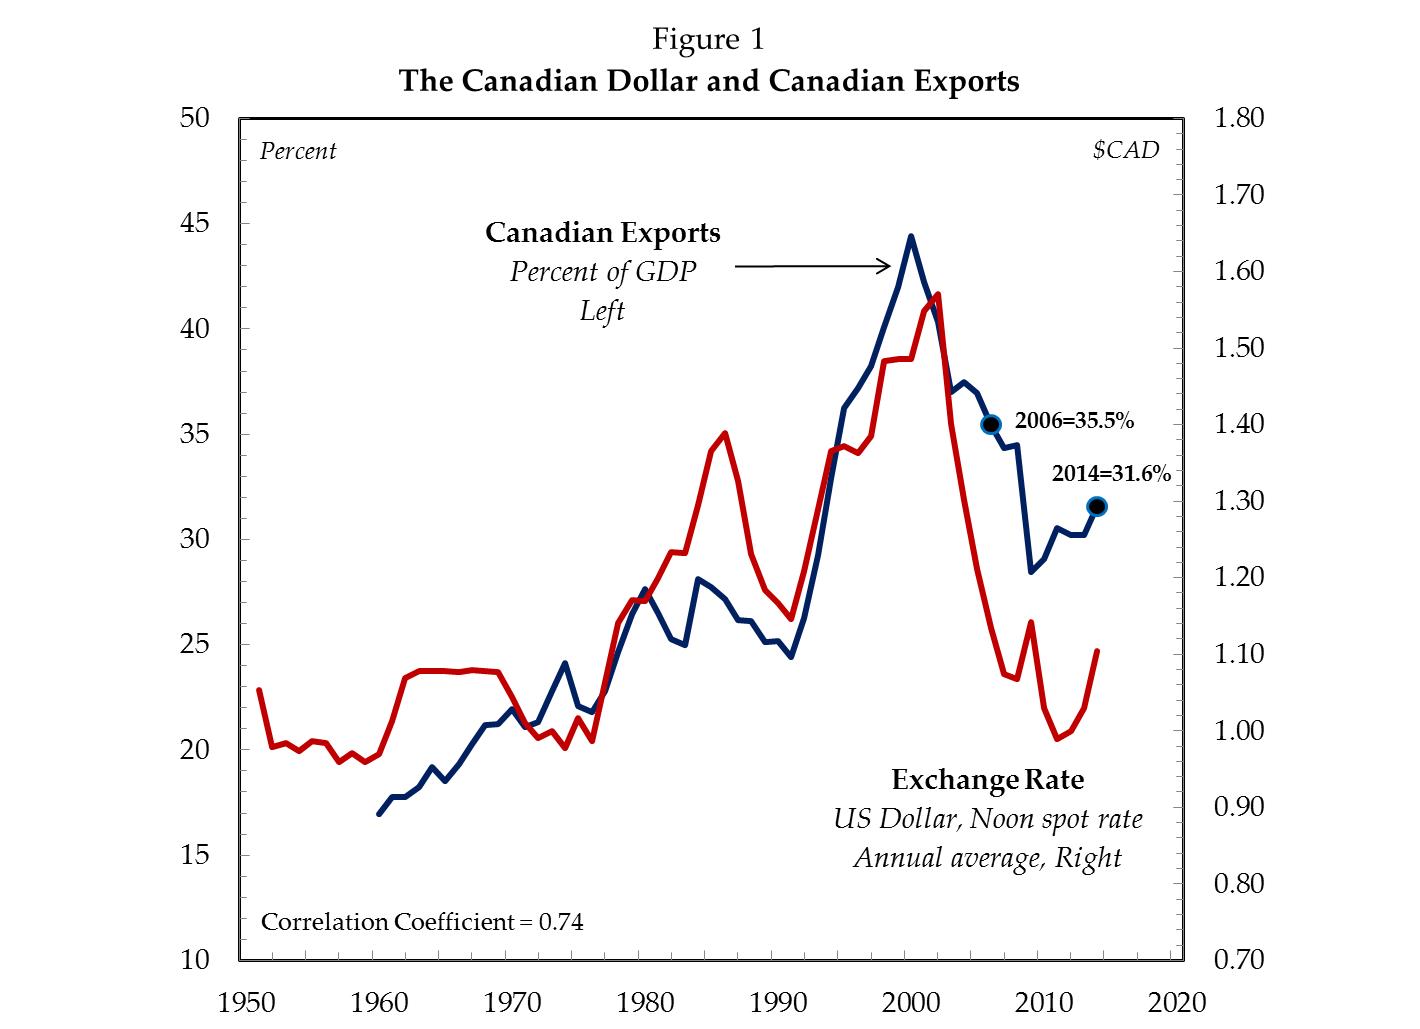 The Canadian Dollar and Canadian Exports